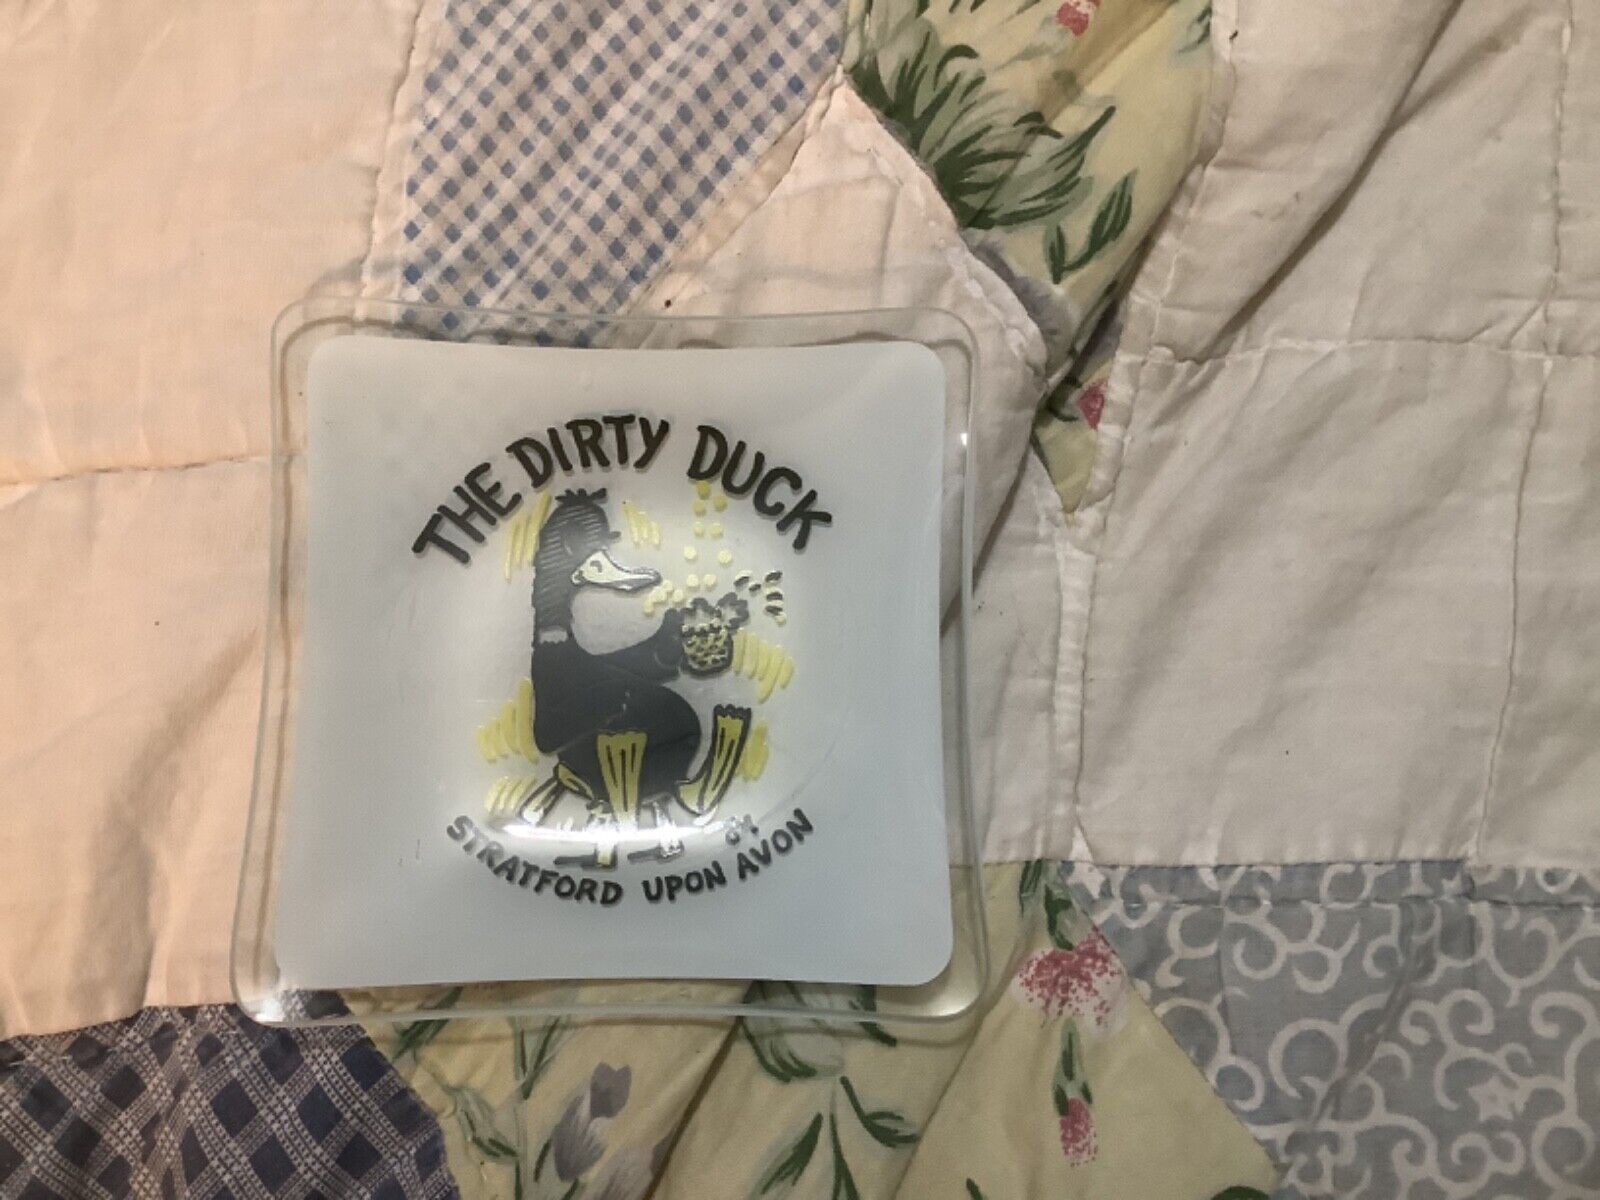 Vintage The Dirty Duck ashtray